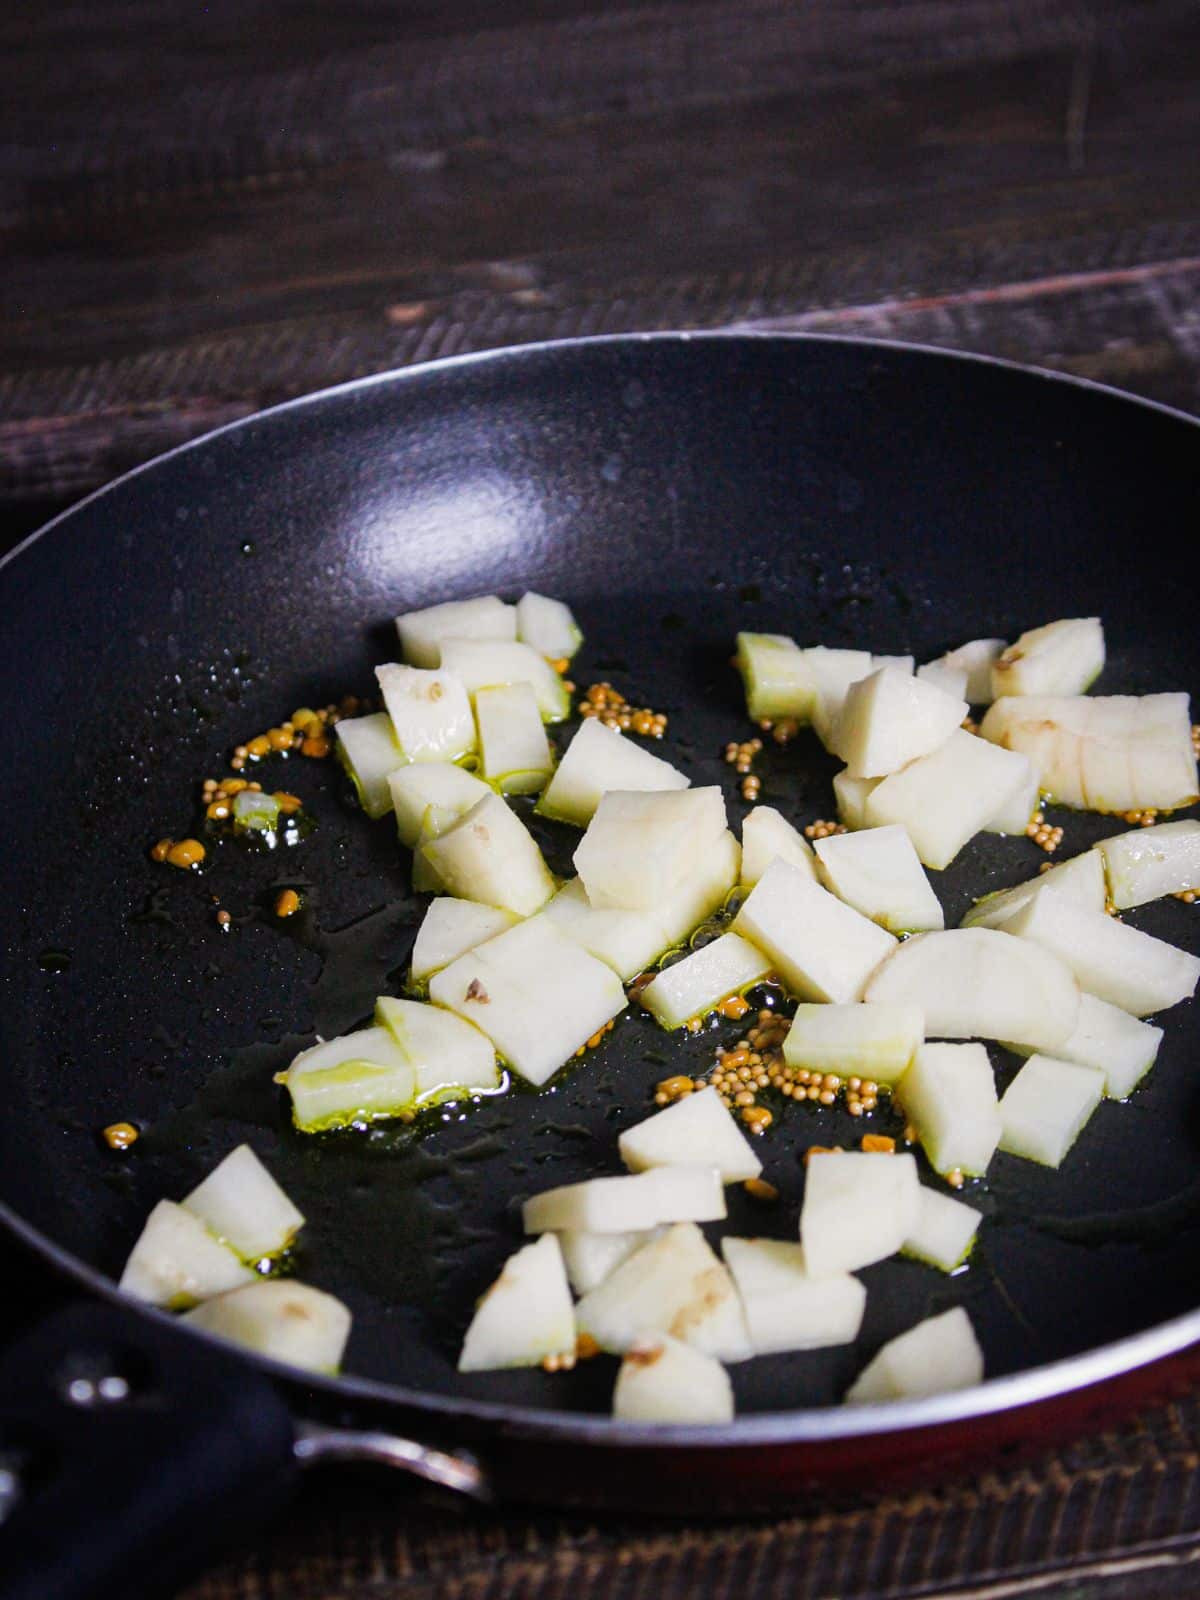 Add cubed potatoes to the pan and mix well